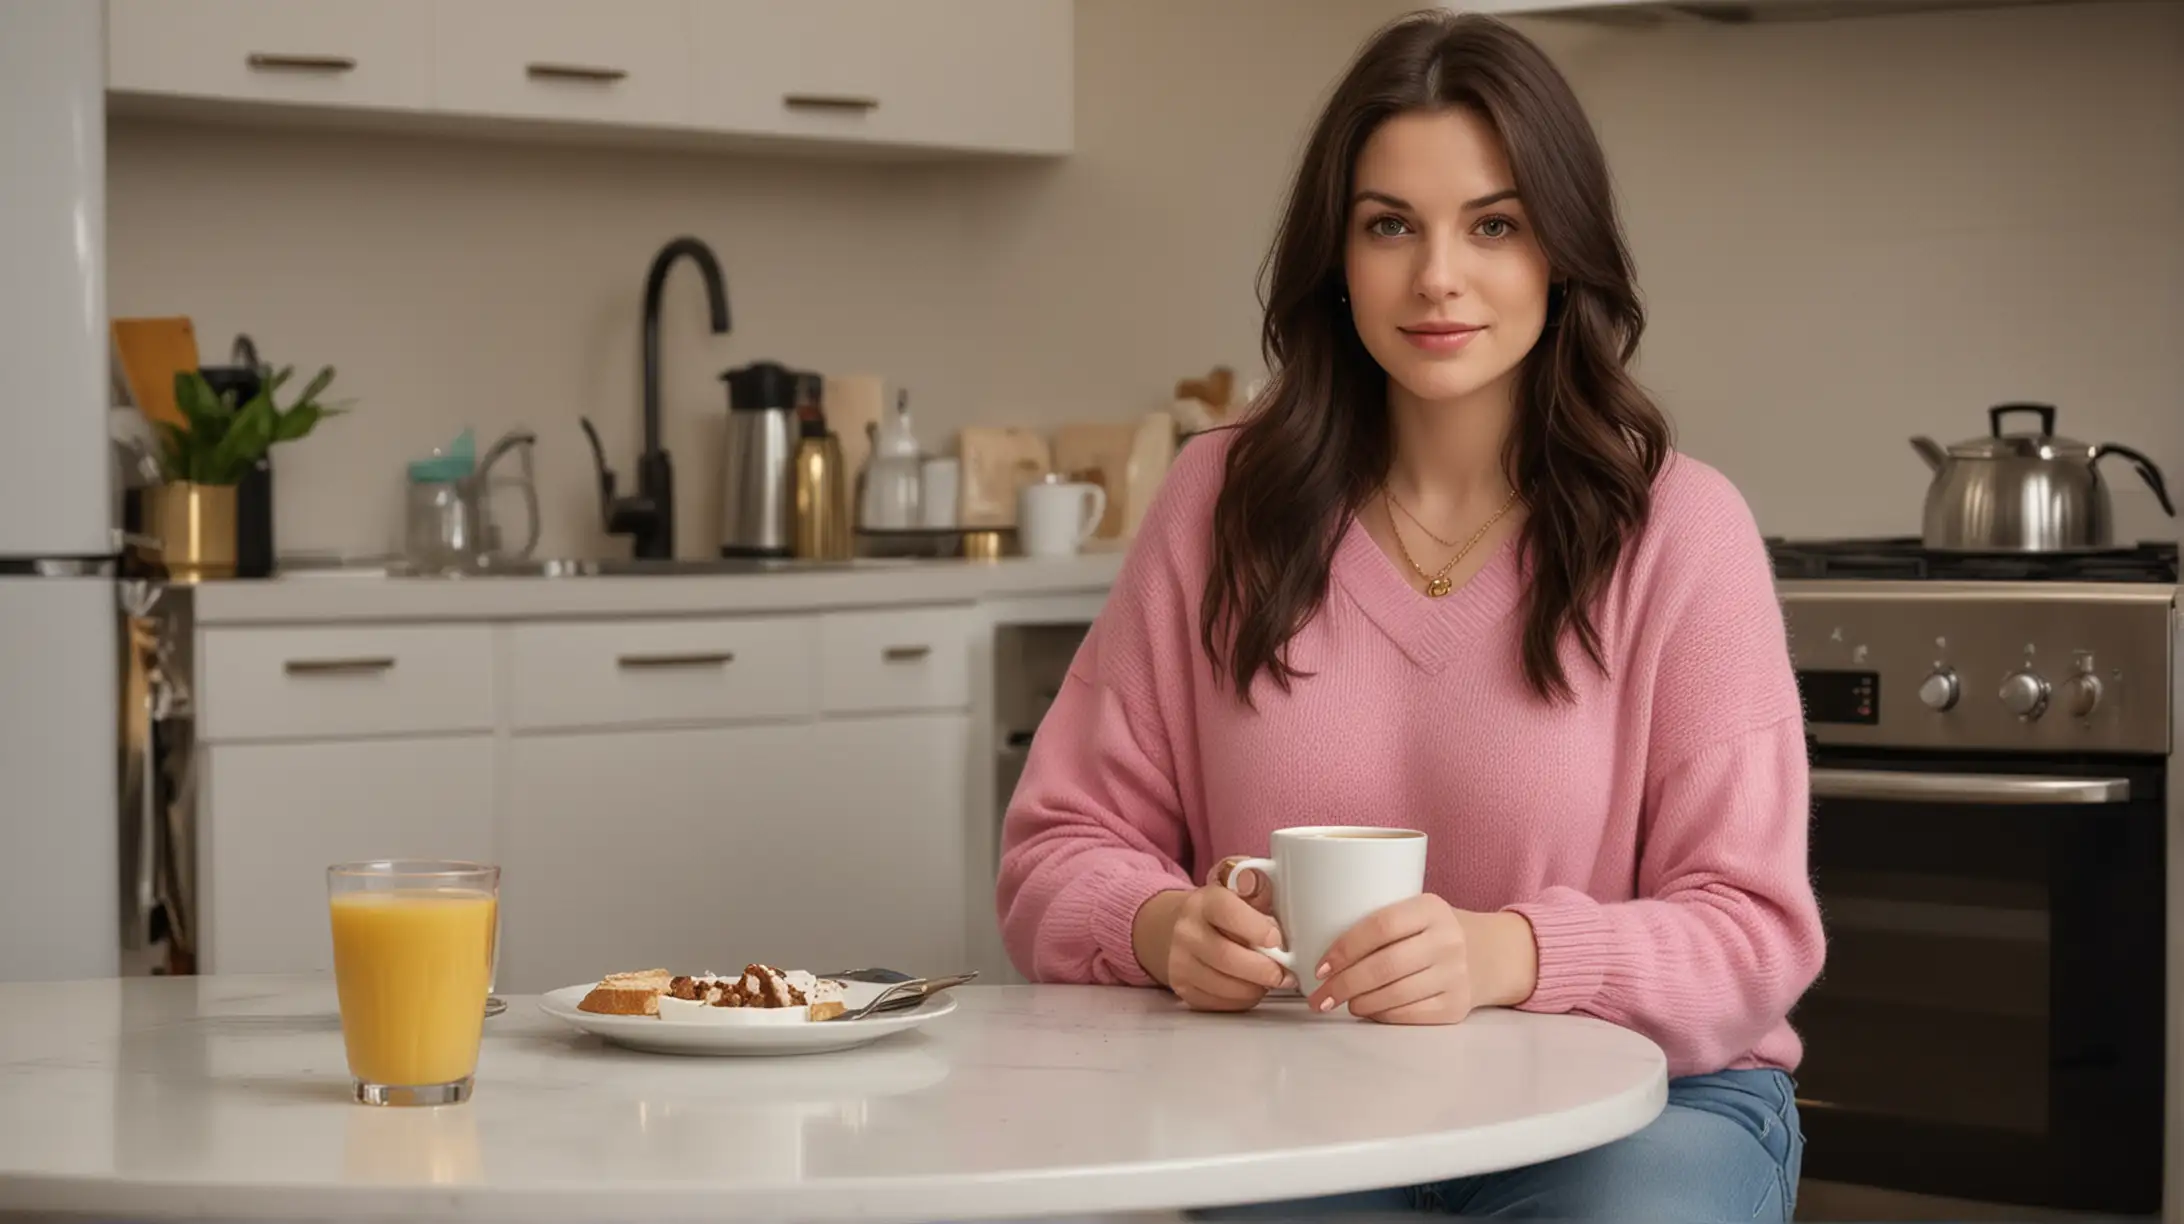 In a modern kitchen at night, 30 year old pale white woman with long dark brown hair parted to the right sitting on a chair, wearing a pink sweater, blue jeans, gold necklace. There is one mug of hot tea on the kitchen table.